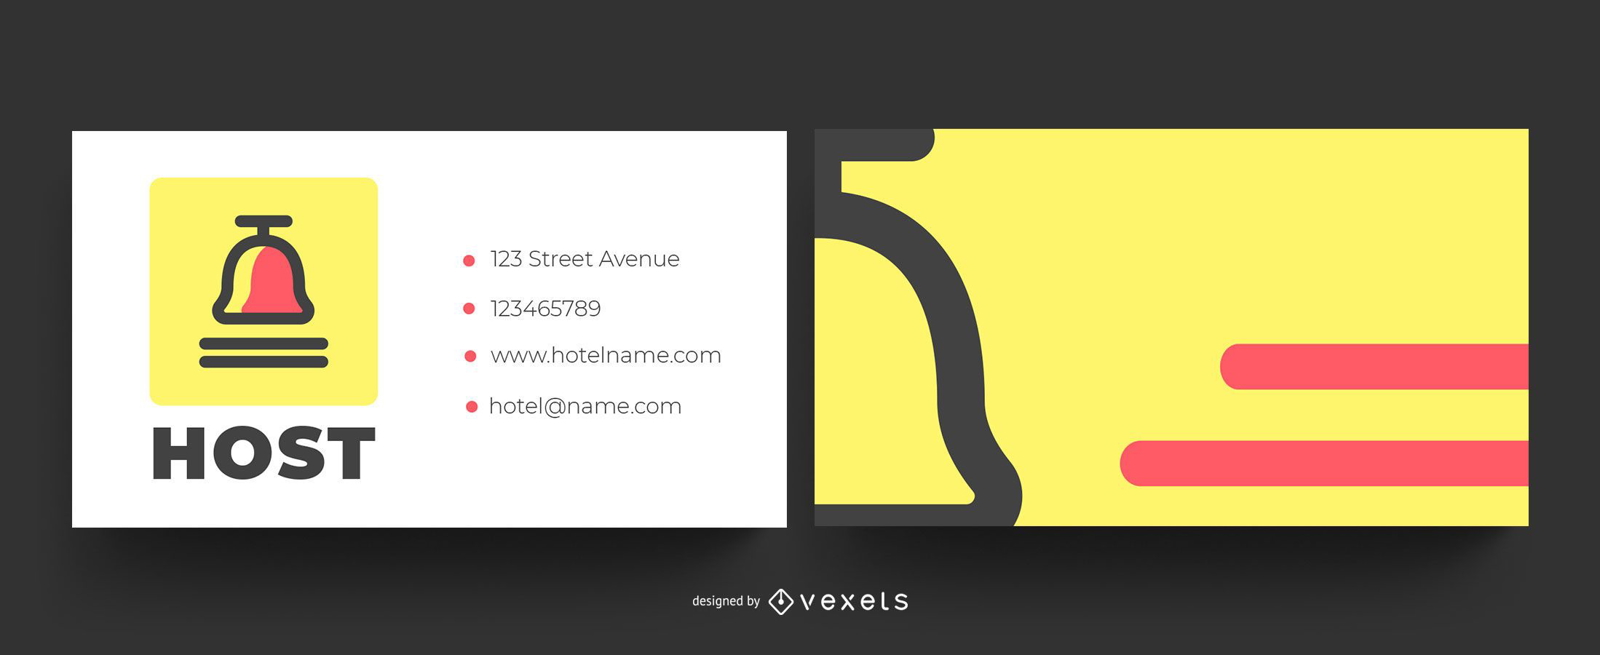 Colorful hotel business card